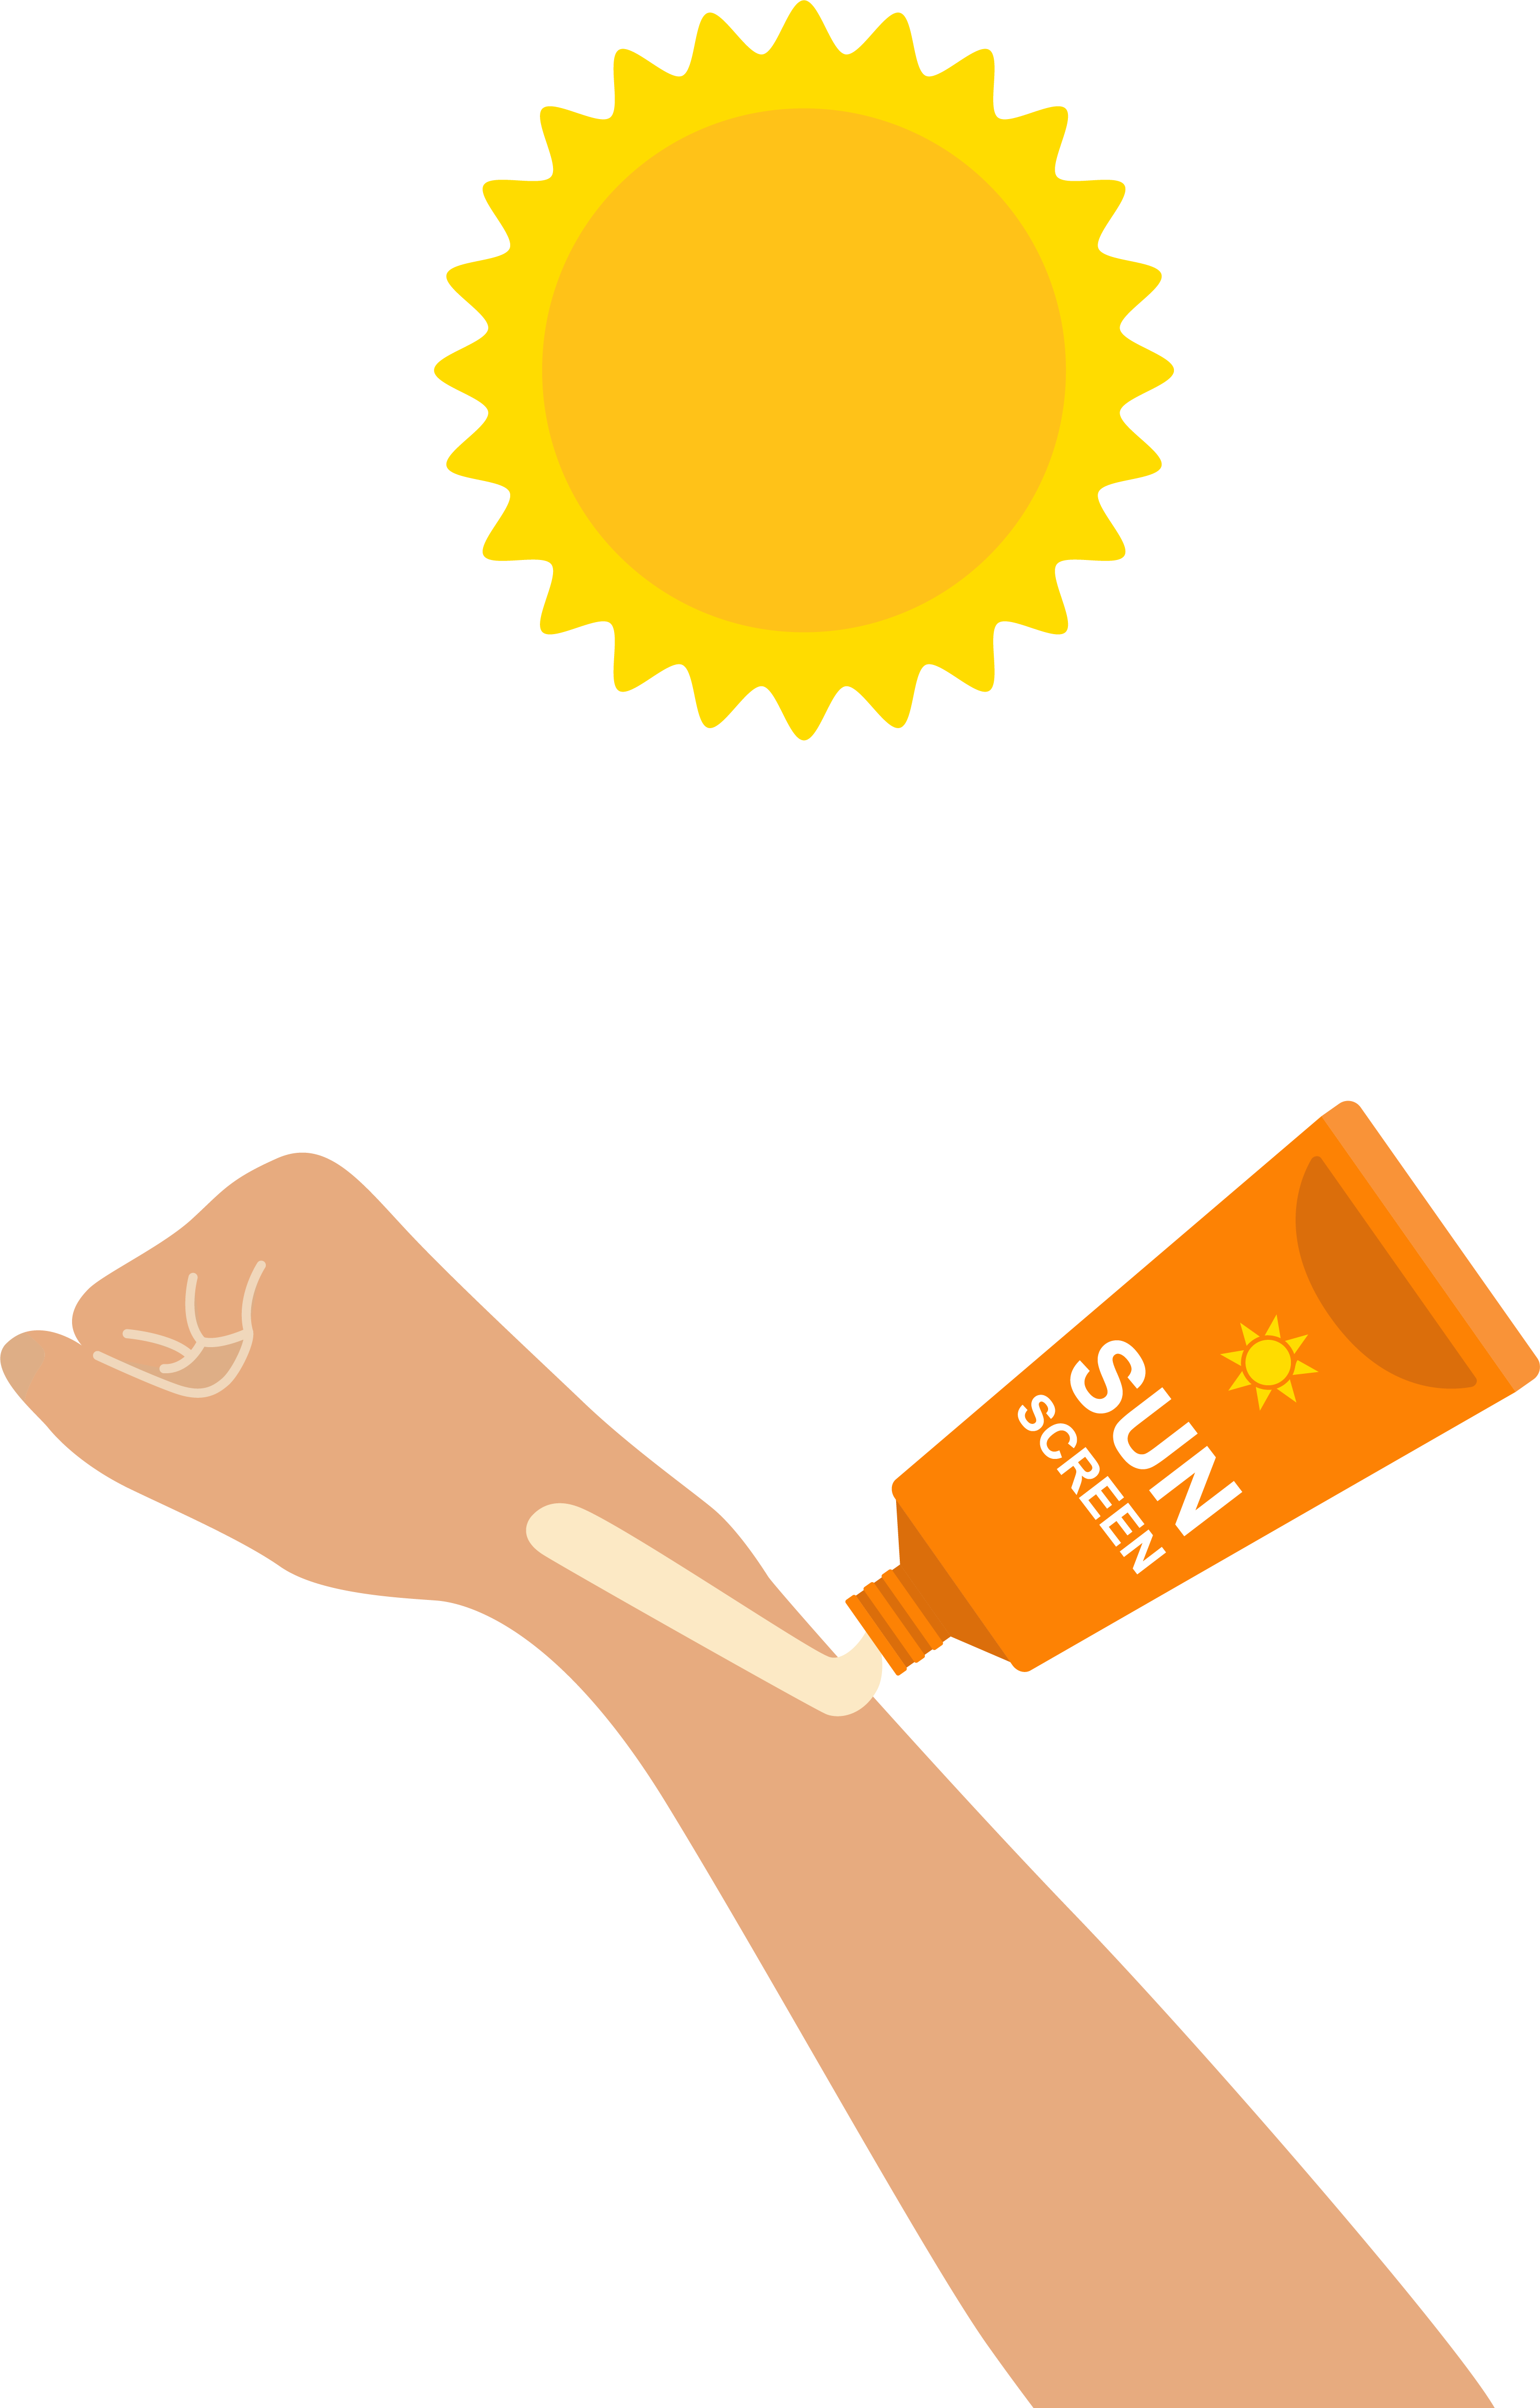 How to apply sunscreen illustration